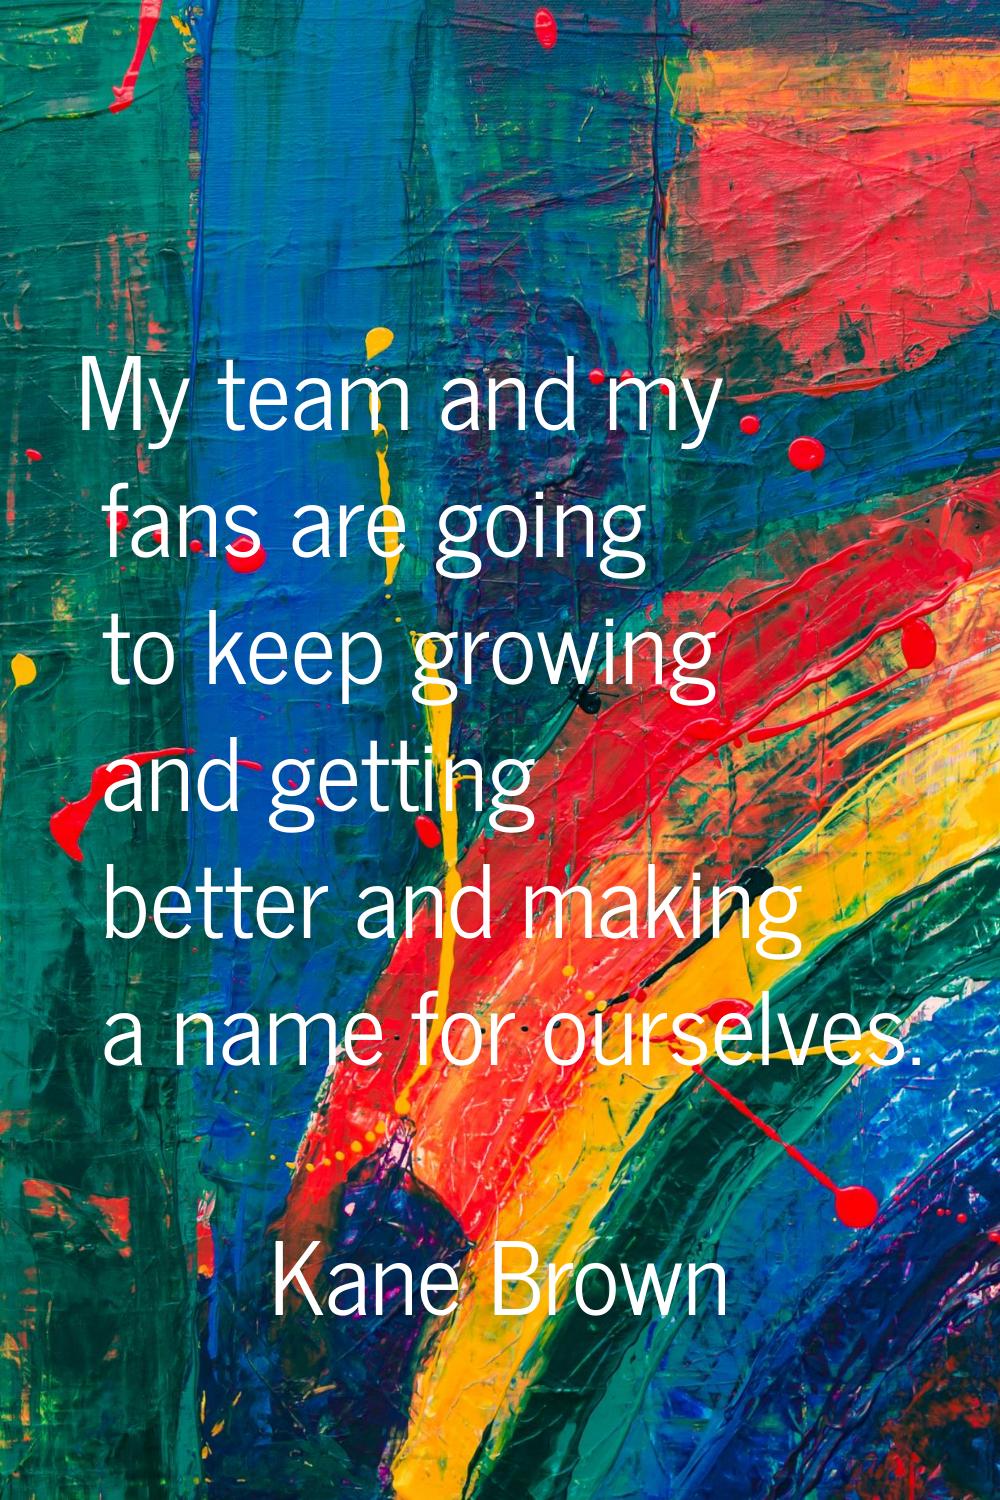 My team and my fans are going to keep growing and getting better and making a name for ourselves.